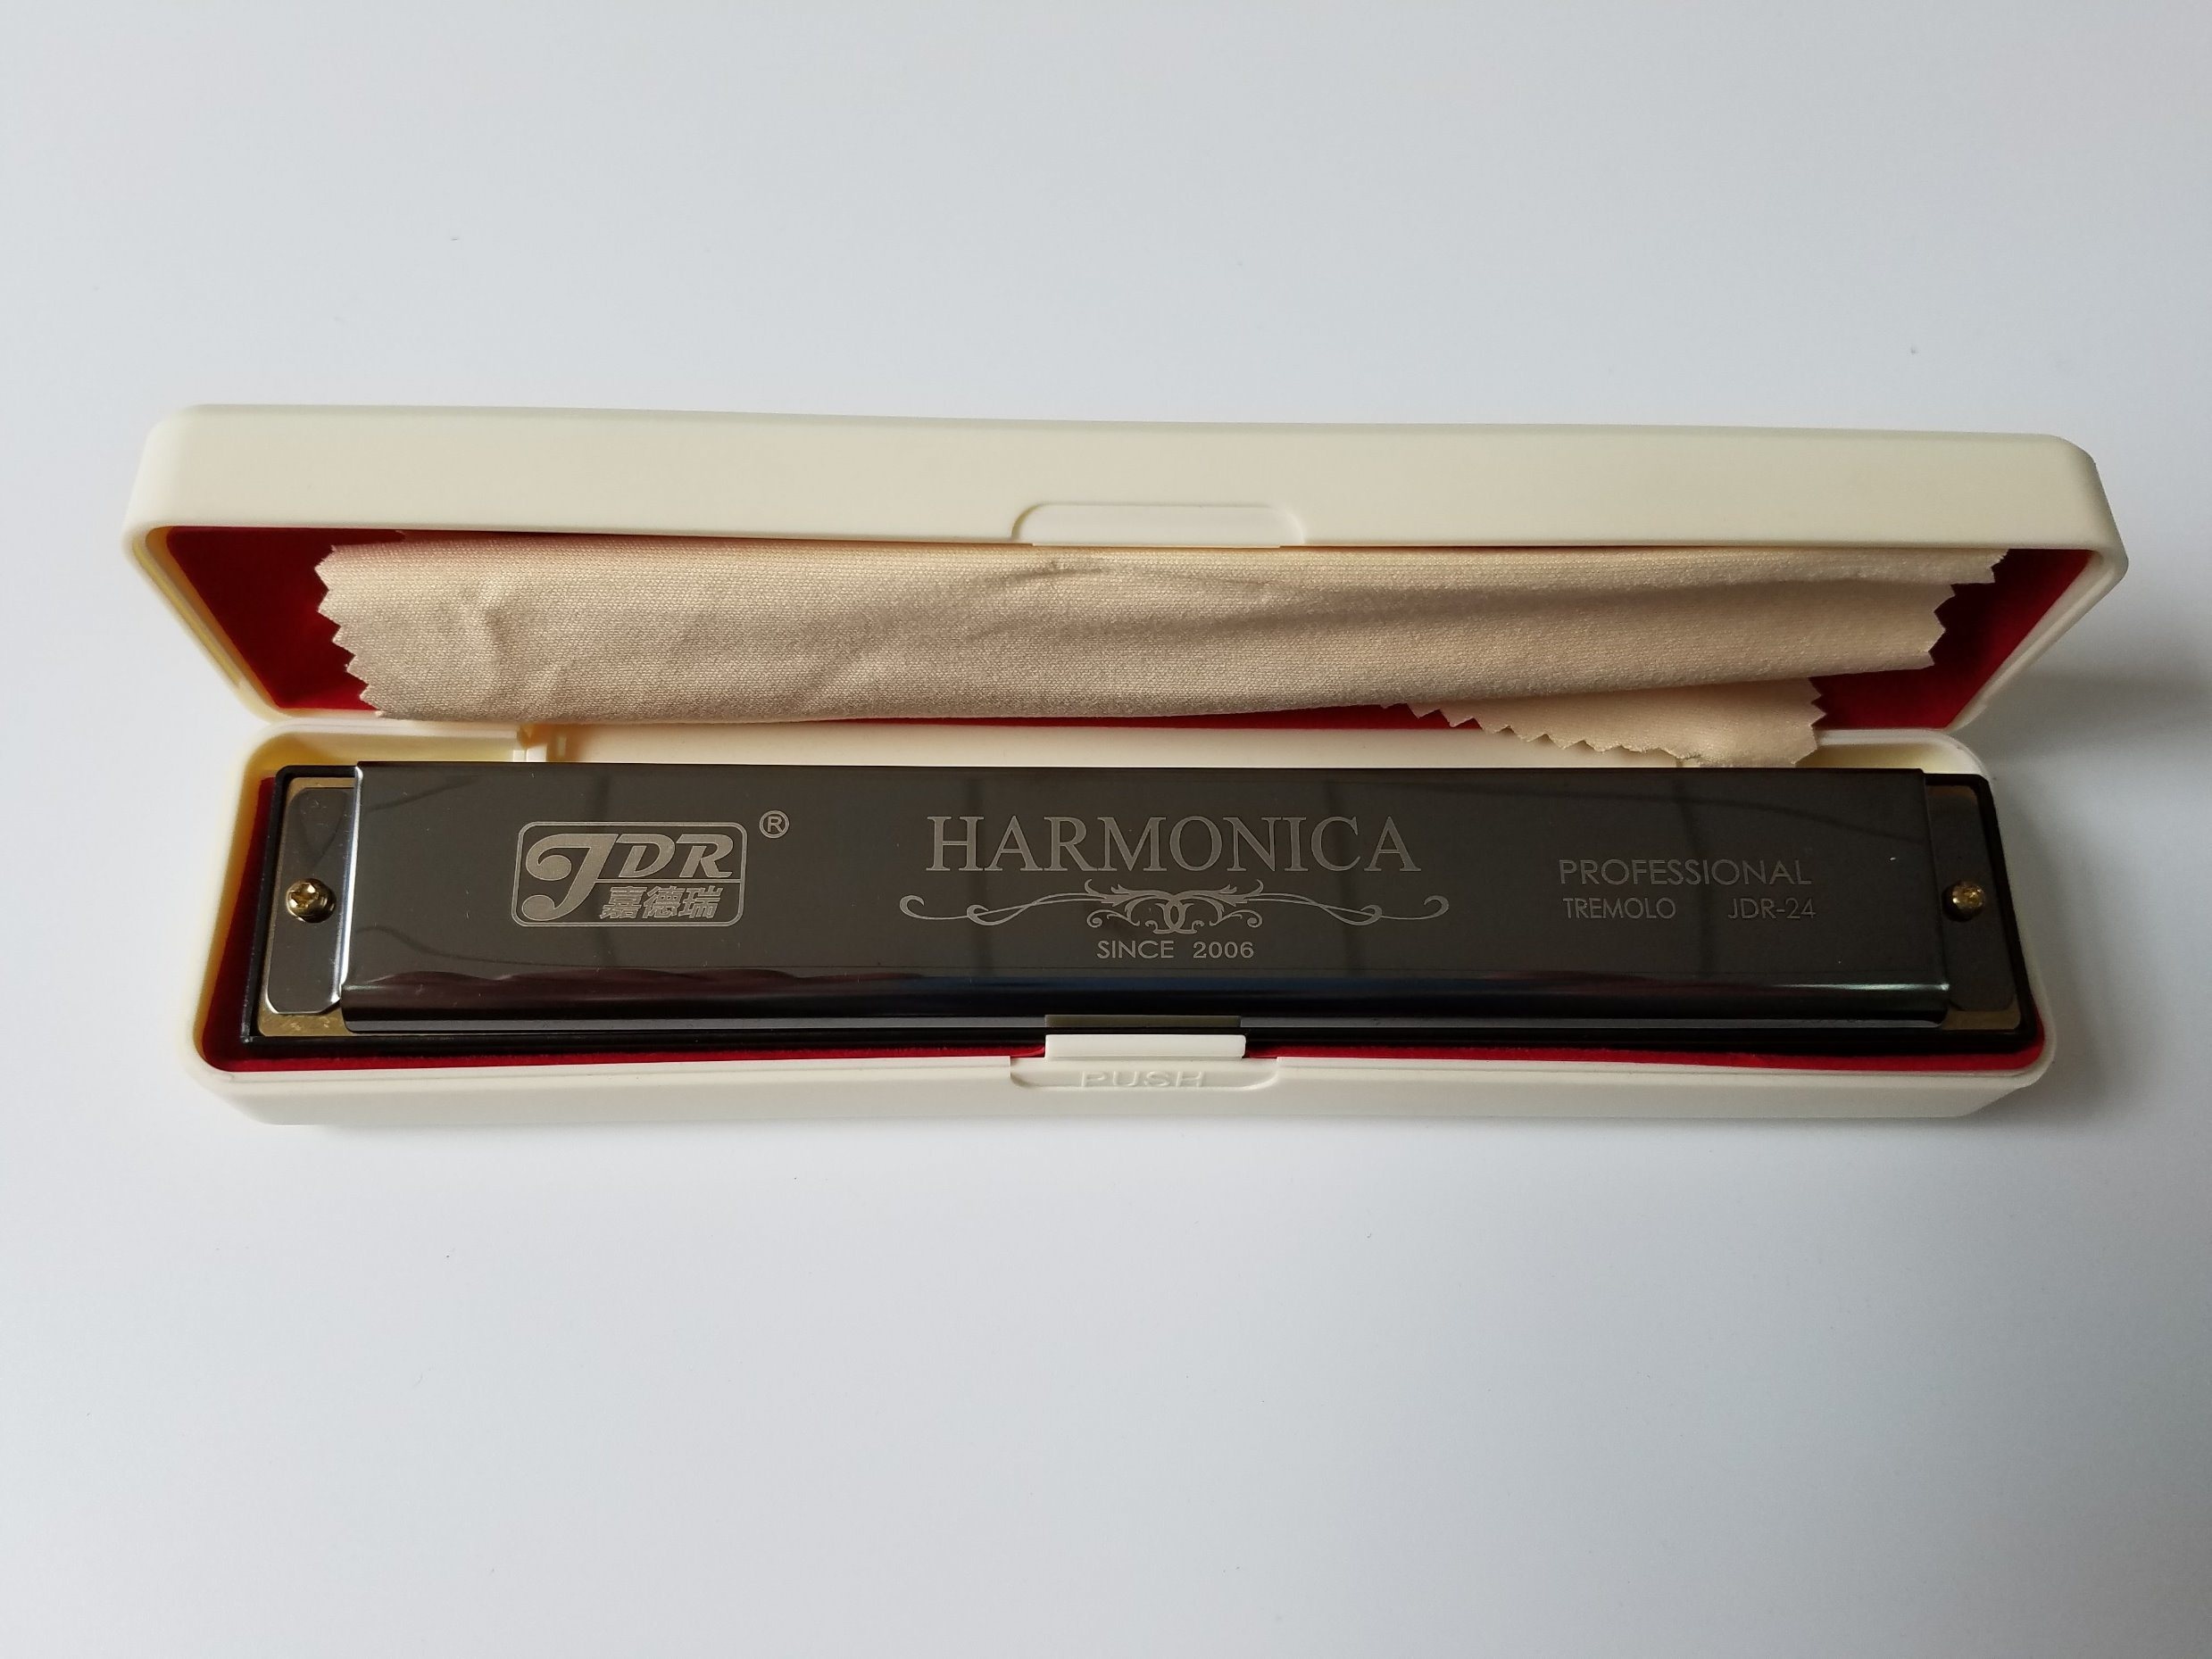 Harmonica: 24 Holes Instrument, Also Called French Harp, Used Worldwide In Many Musical Genres, JDR-24, Professional Tremolo, Mad In China. 2480x1860 HD Background.